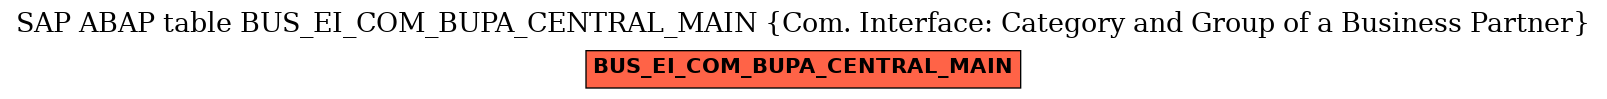 E-R Diagram for table BUS_EI_COM_BUPA_CENTRAL_MAIN (Com. Interface: Category and Group of a Business Partner)